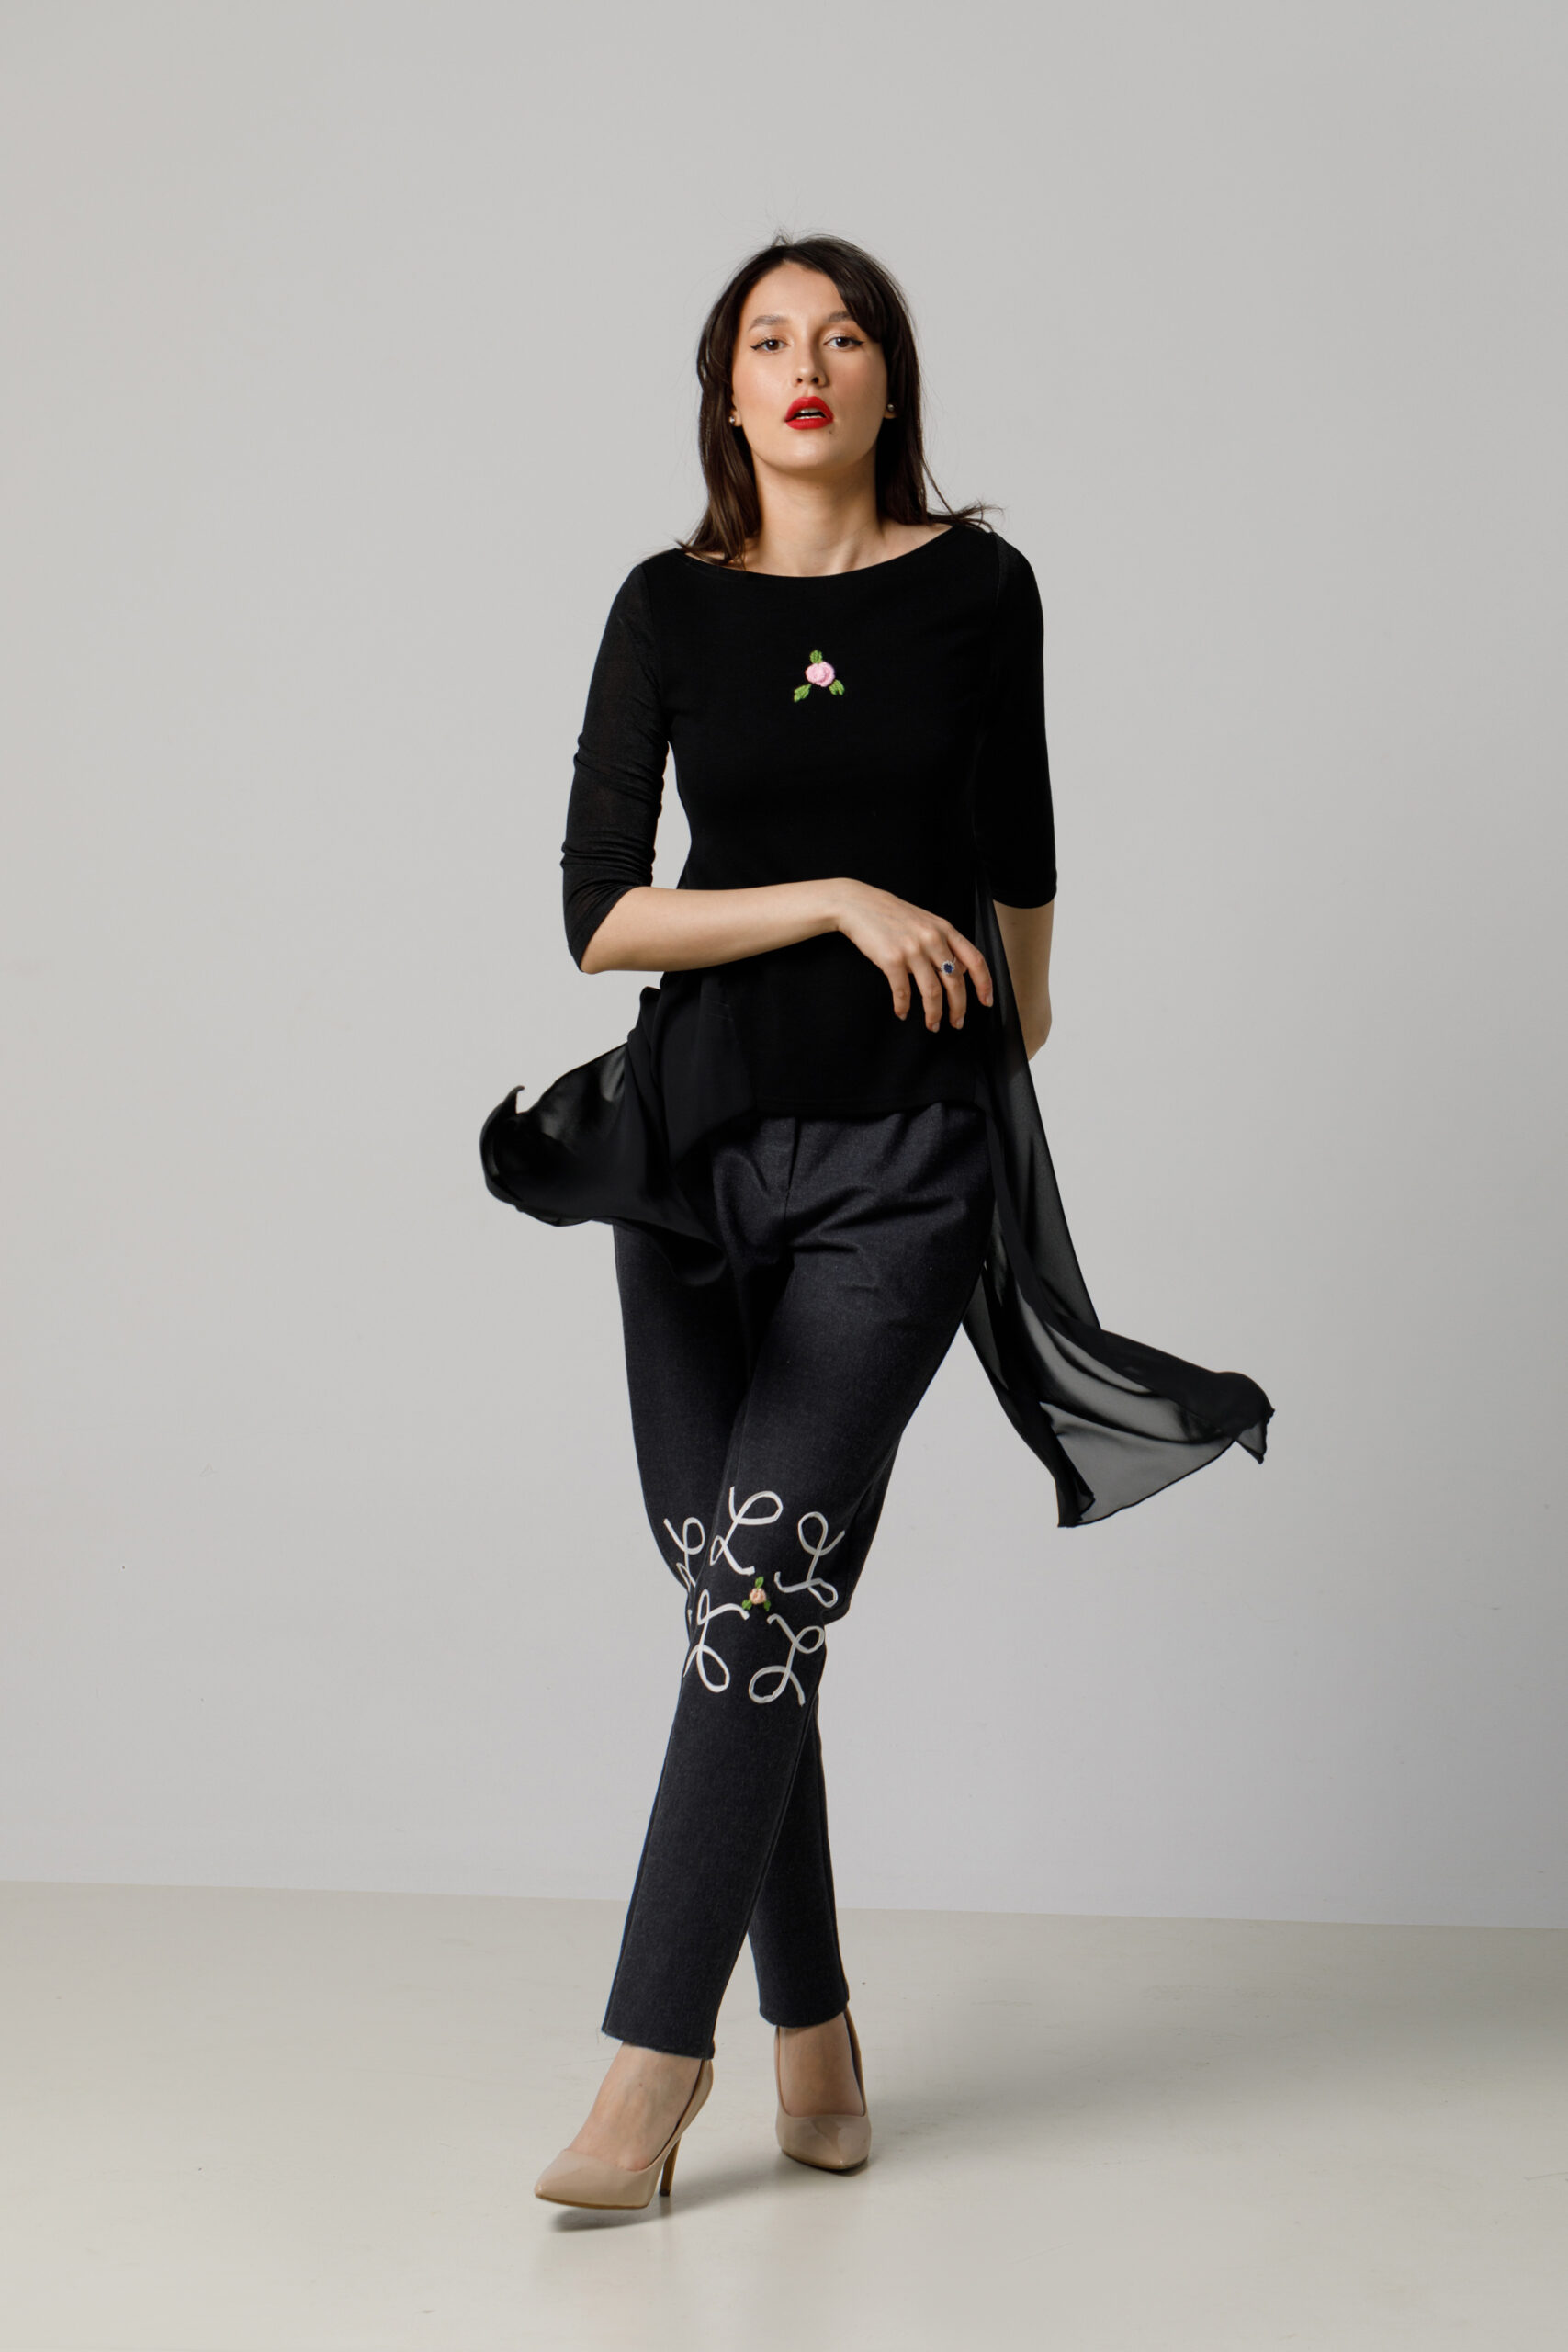 IONA Casual black blouse with veil side scarves. Natural fabrics, original design, handmade embroidery